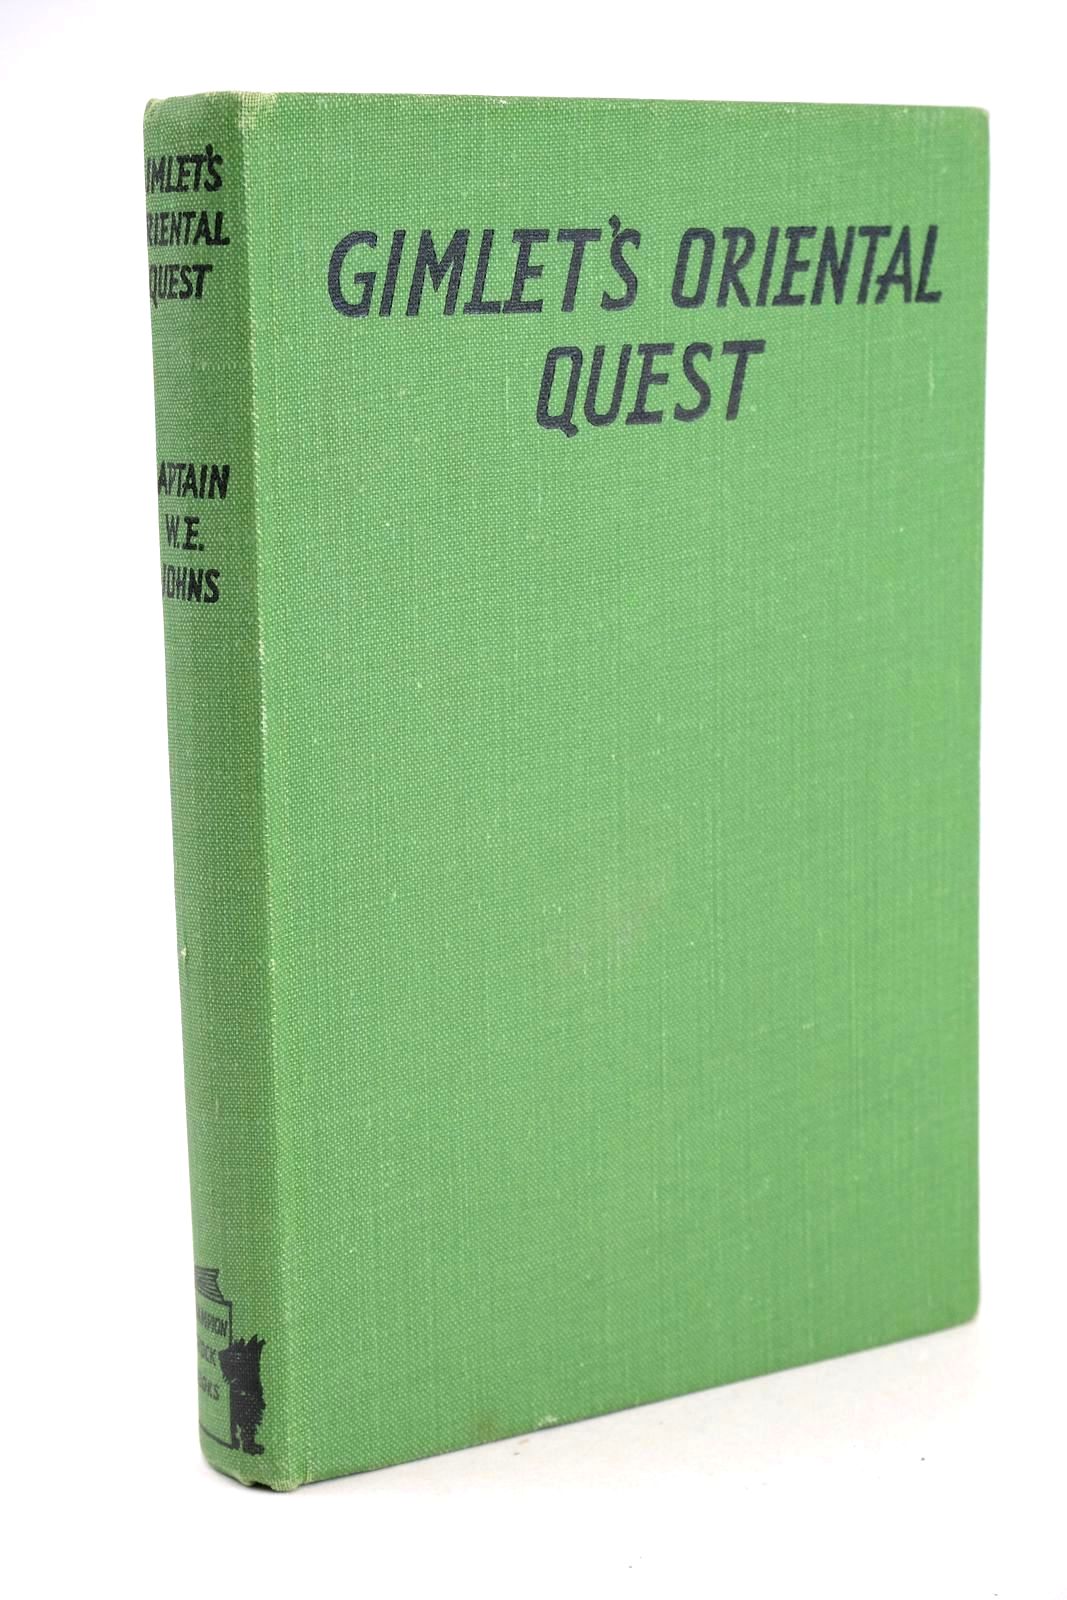 Photo of GIMLET'S ORIENTAL QUEST- Stock Number: 1326225